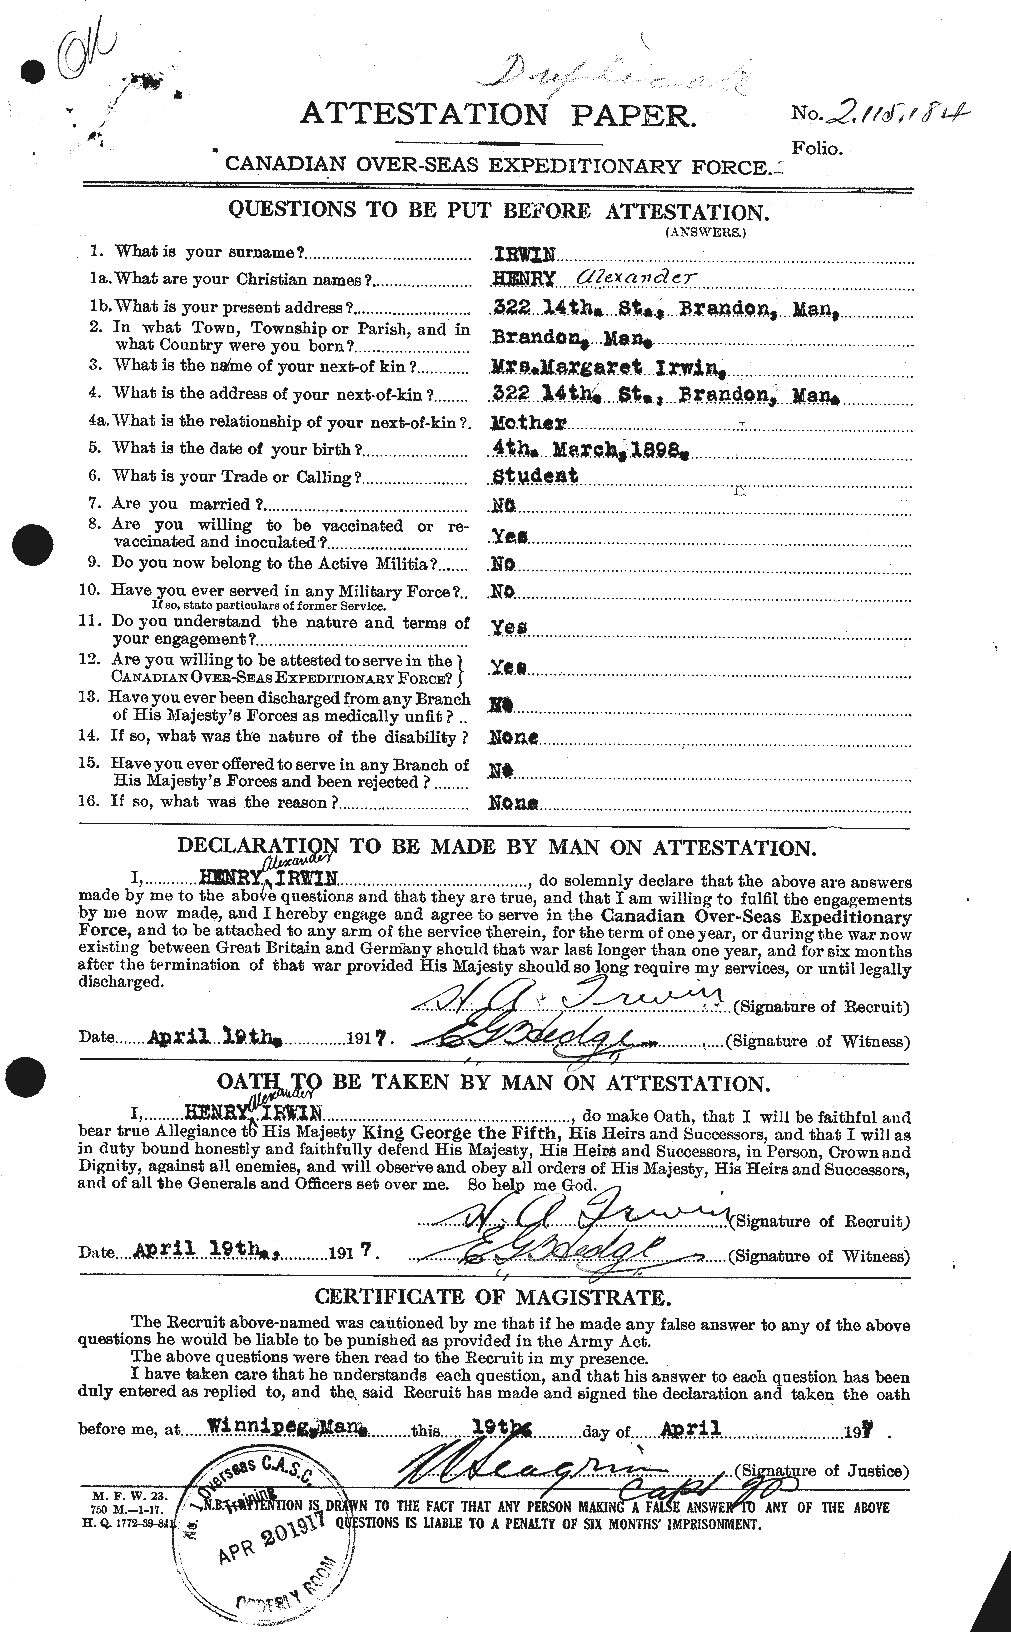 Personnel Records of the First World War - CEF 412872a